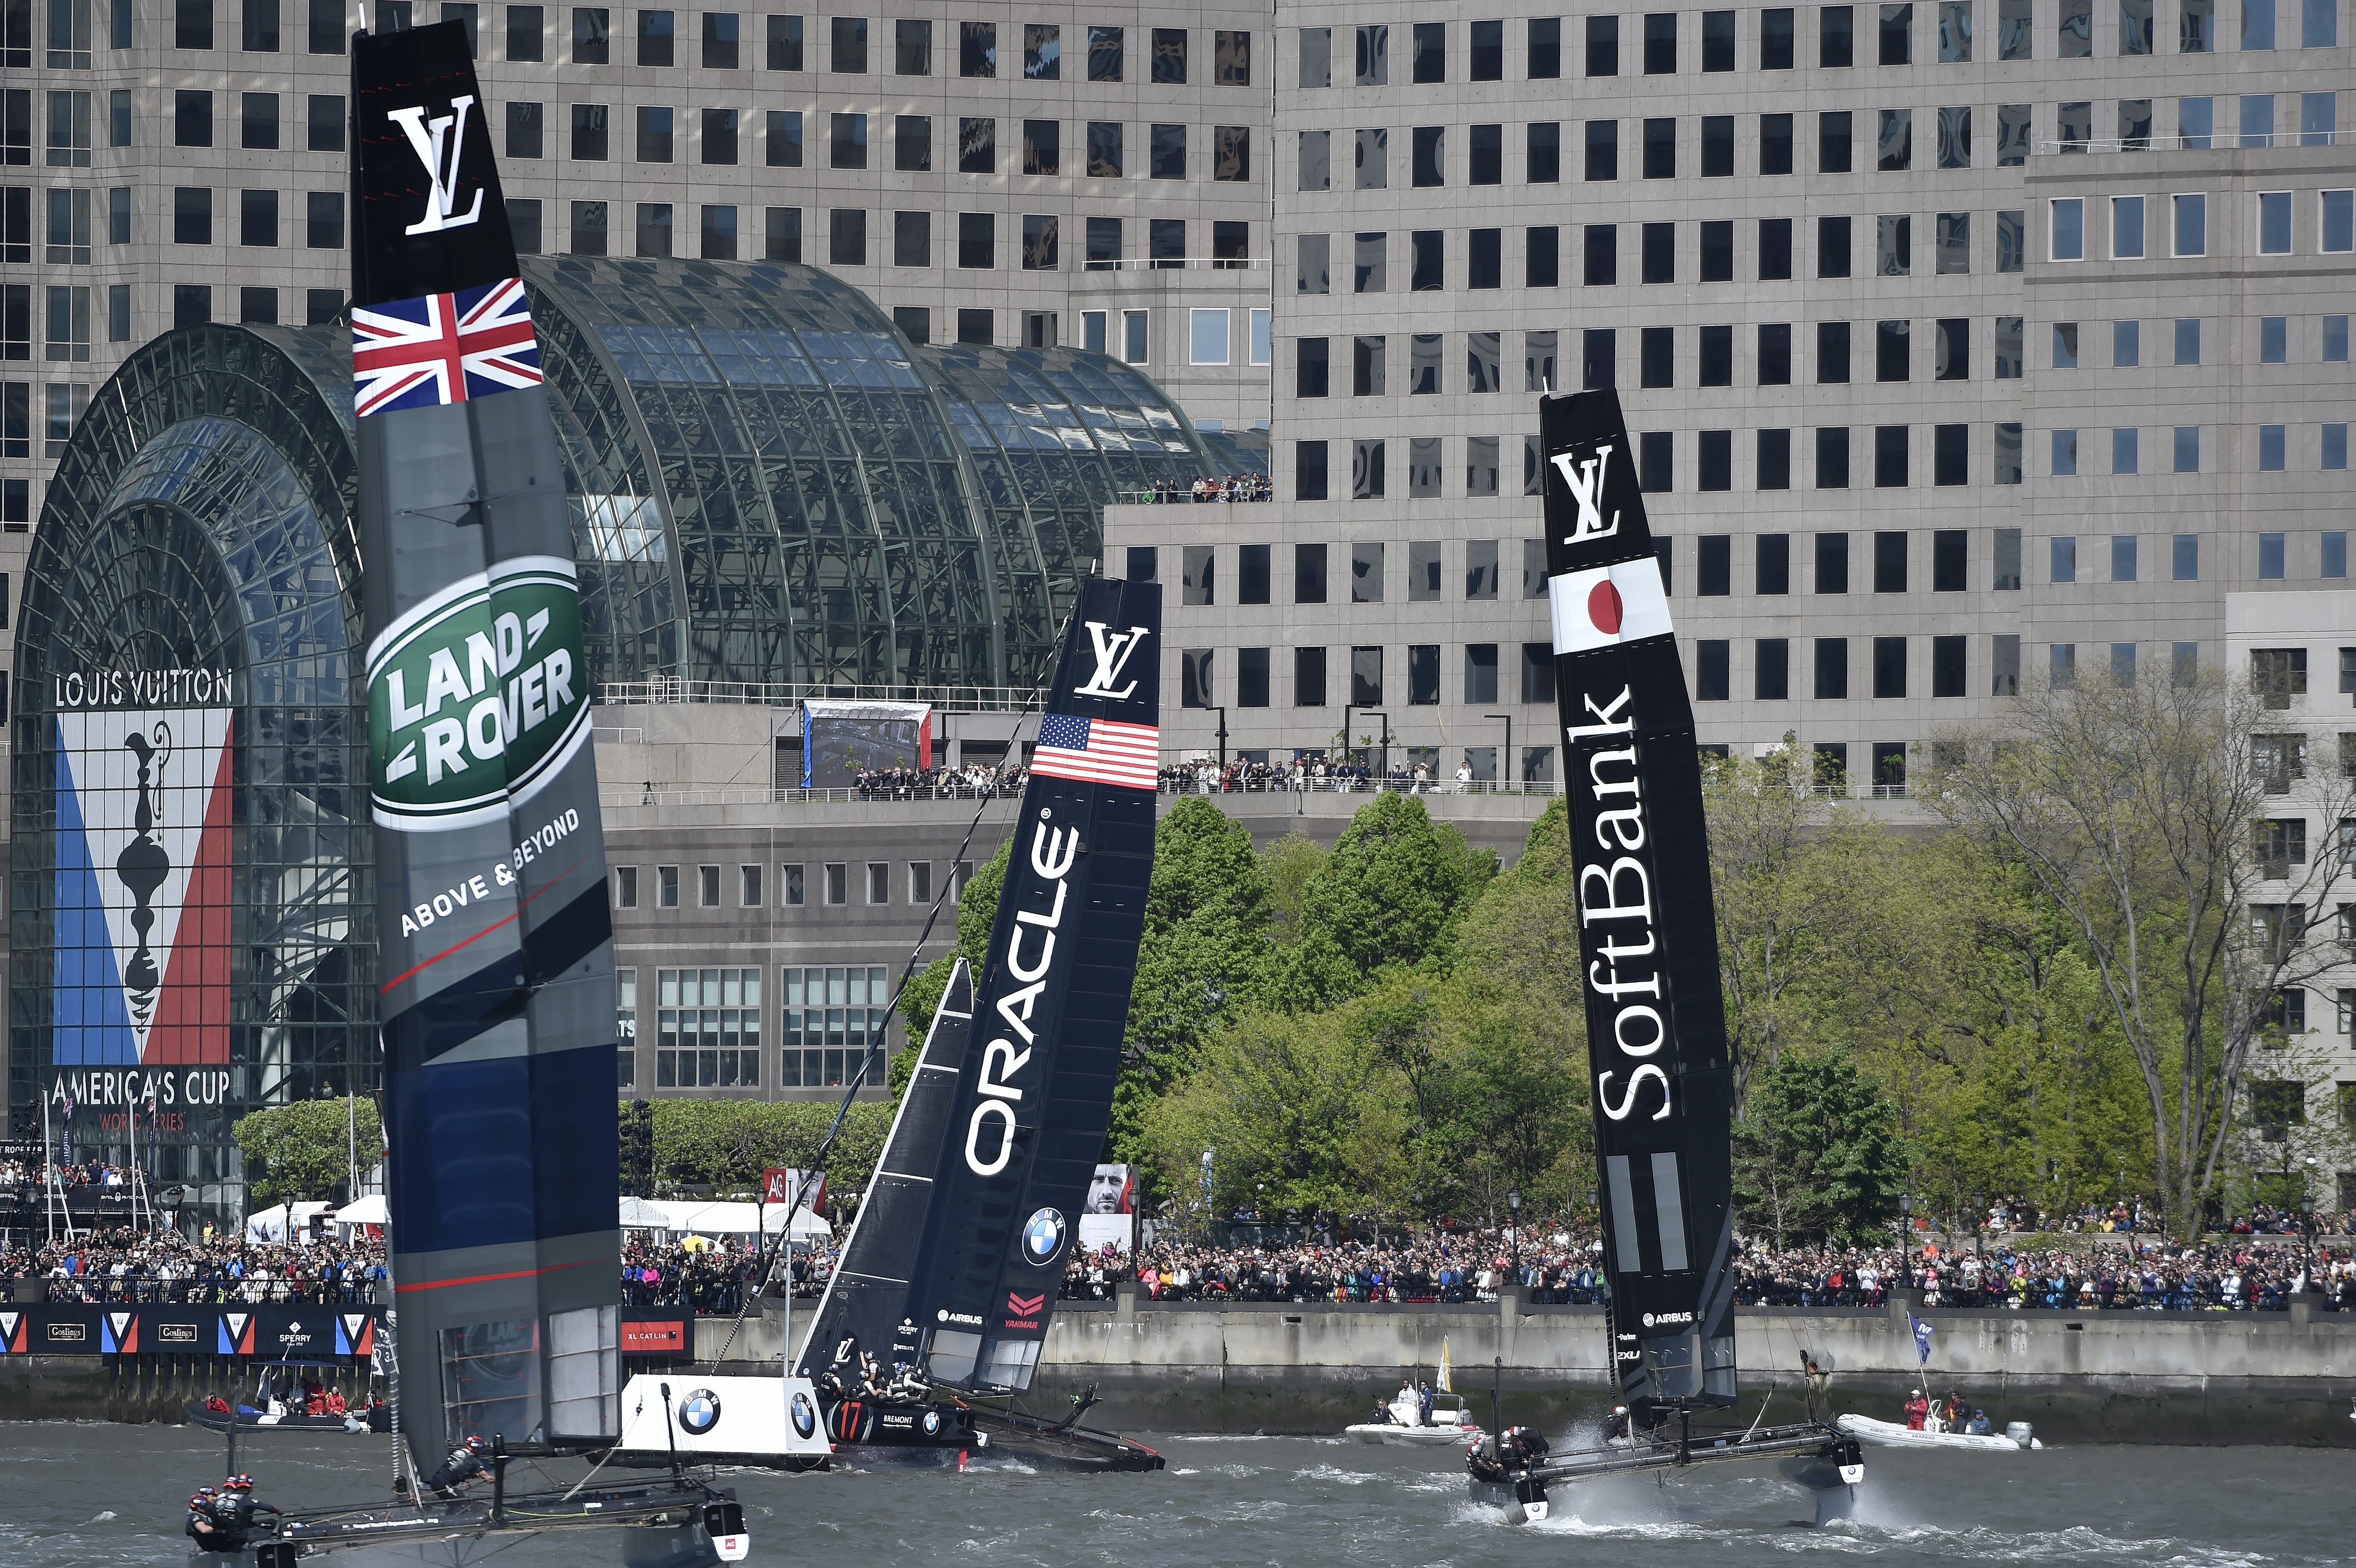 Oracle Team USA leads Softbank Team Japan around a buoy during a Louis Vuitton America's Cup World Series preliminary race in New York City. Photo by David Tulis.                                                                                                                   